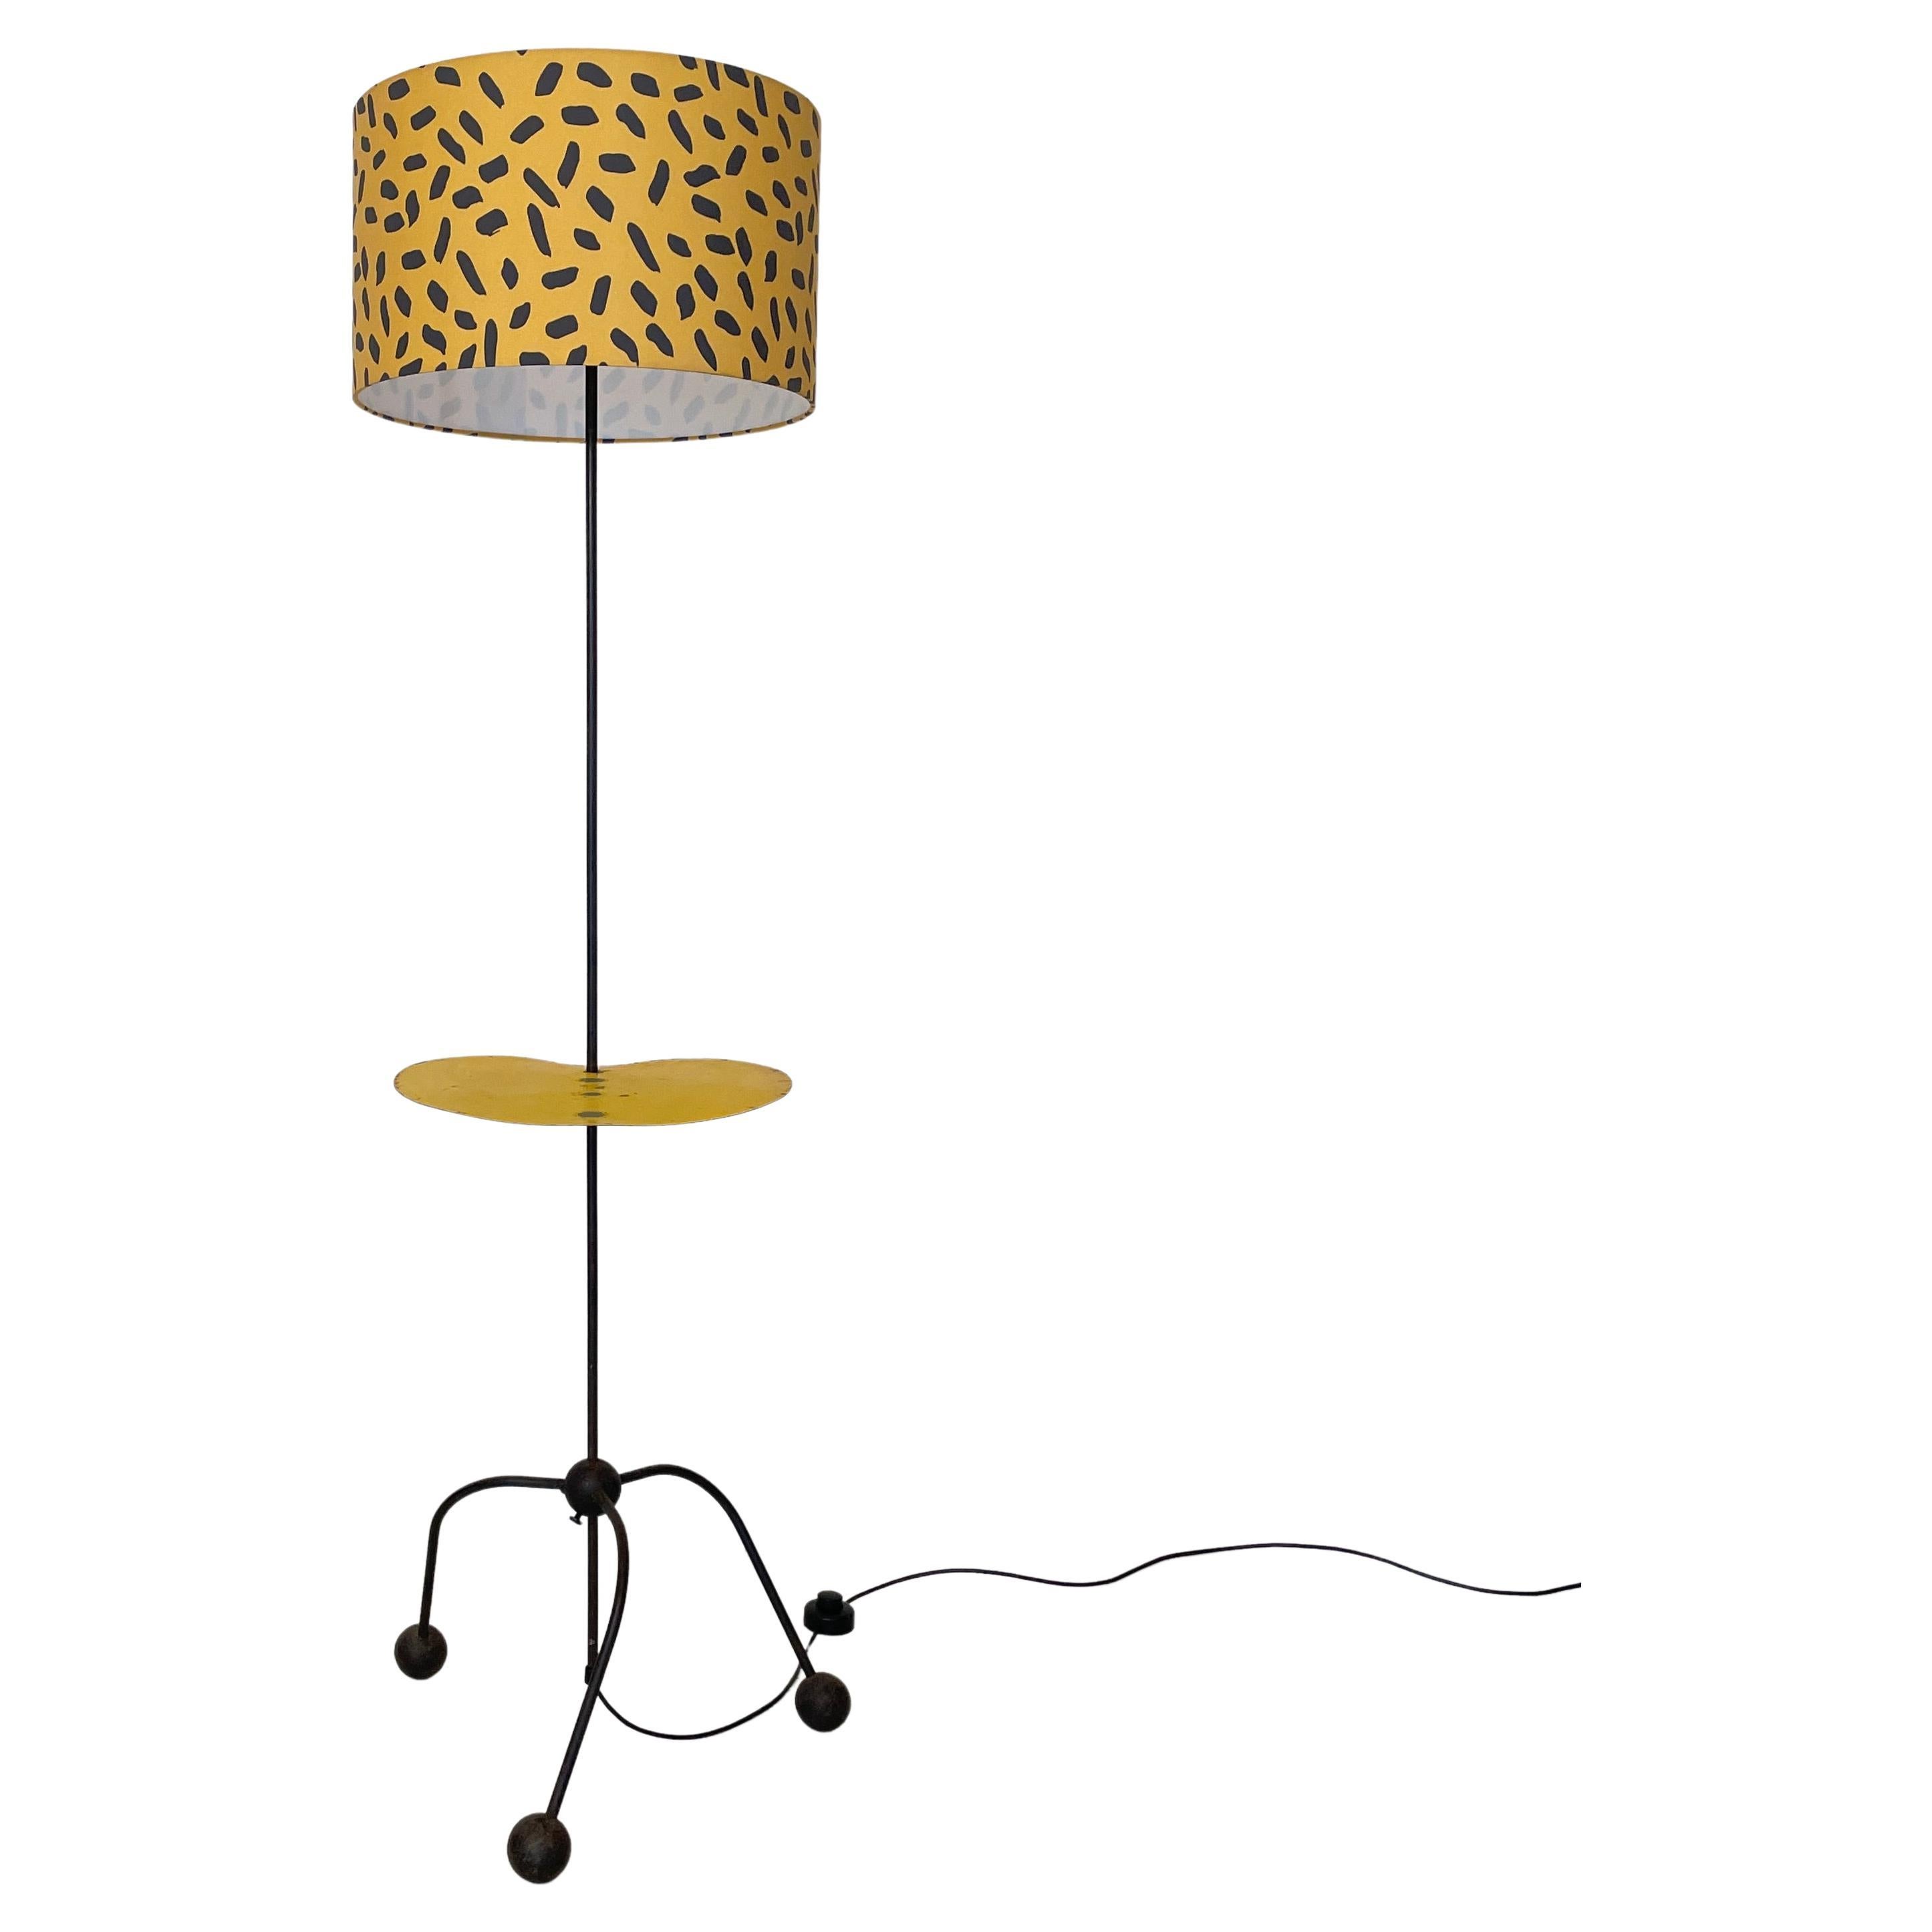 Mid-Century French Floor Lamp Made of Black Metal with Yellow Fabric Shade, 1950